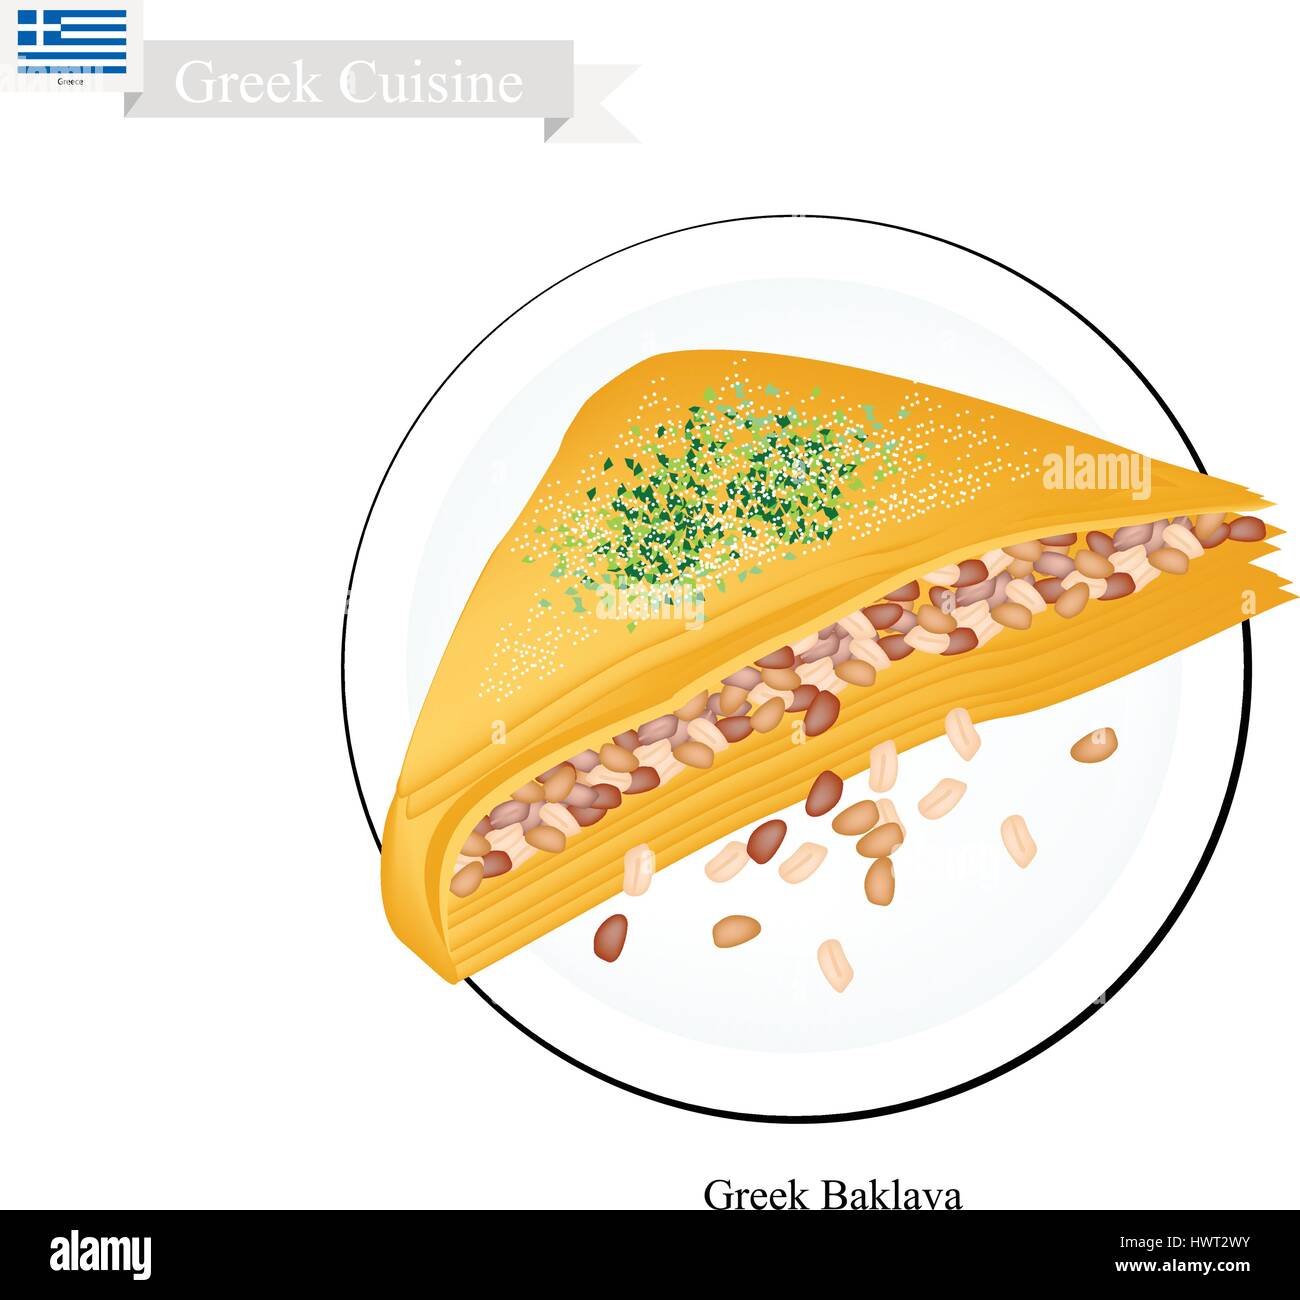 Greek Cuisine, Baklava or Traditional Phyllo Dough Topping with Pistachio and Syrup. One of The Most Popular Dessert in Greece. Stock Vector